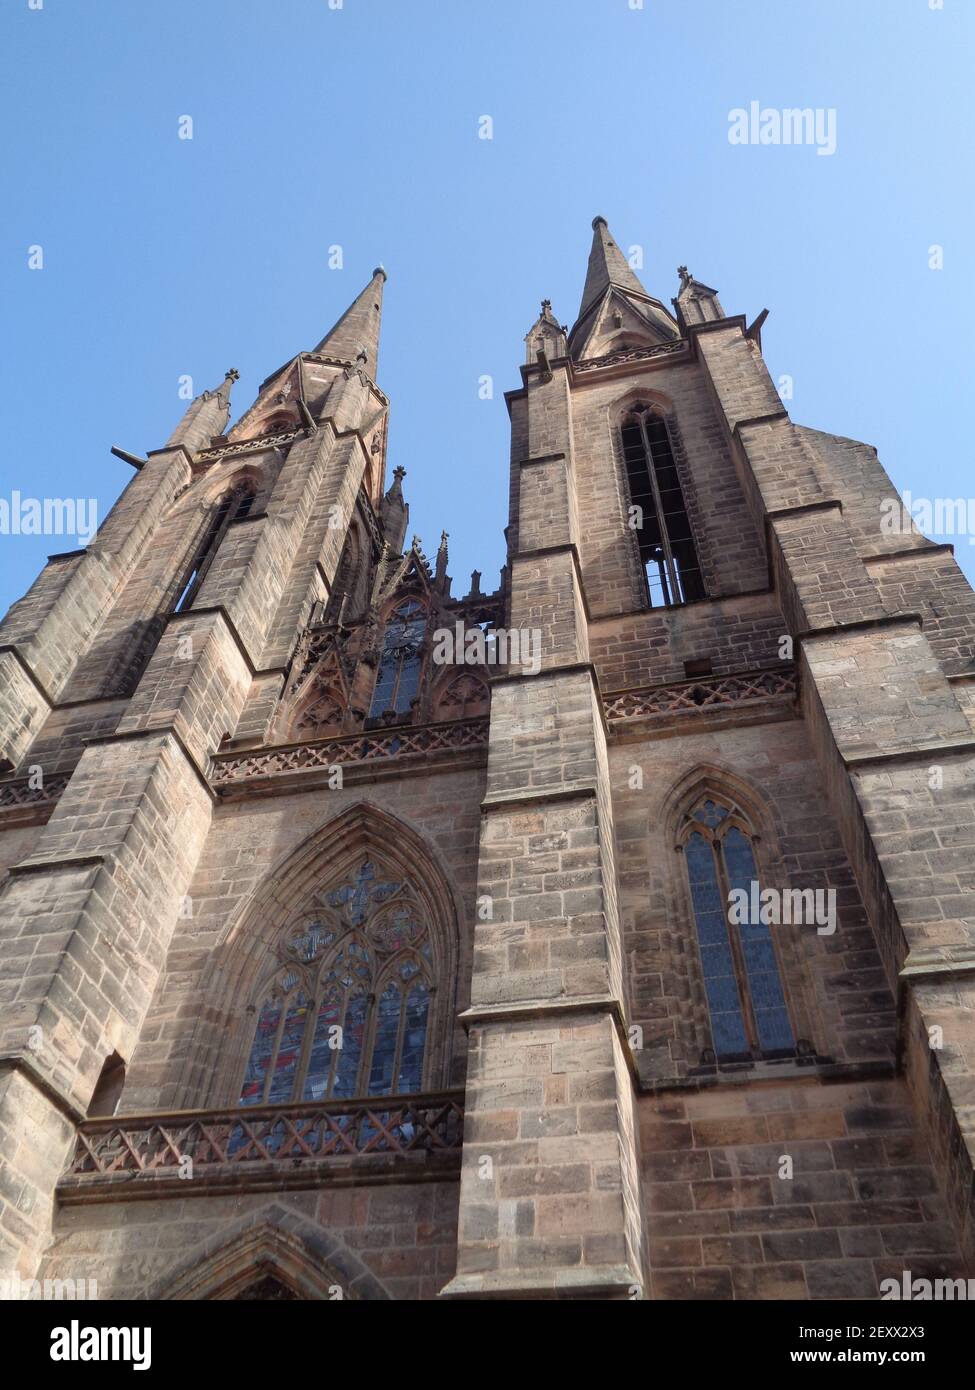 The Church of St. Elisabeth in Marburg, Germany is the oldest Gothic church in German-speaking countries. Stock Photo